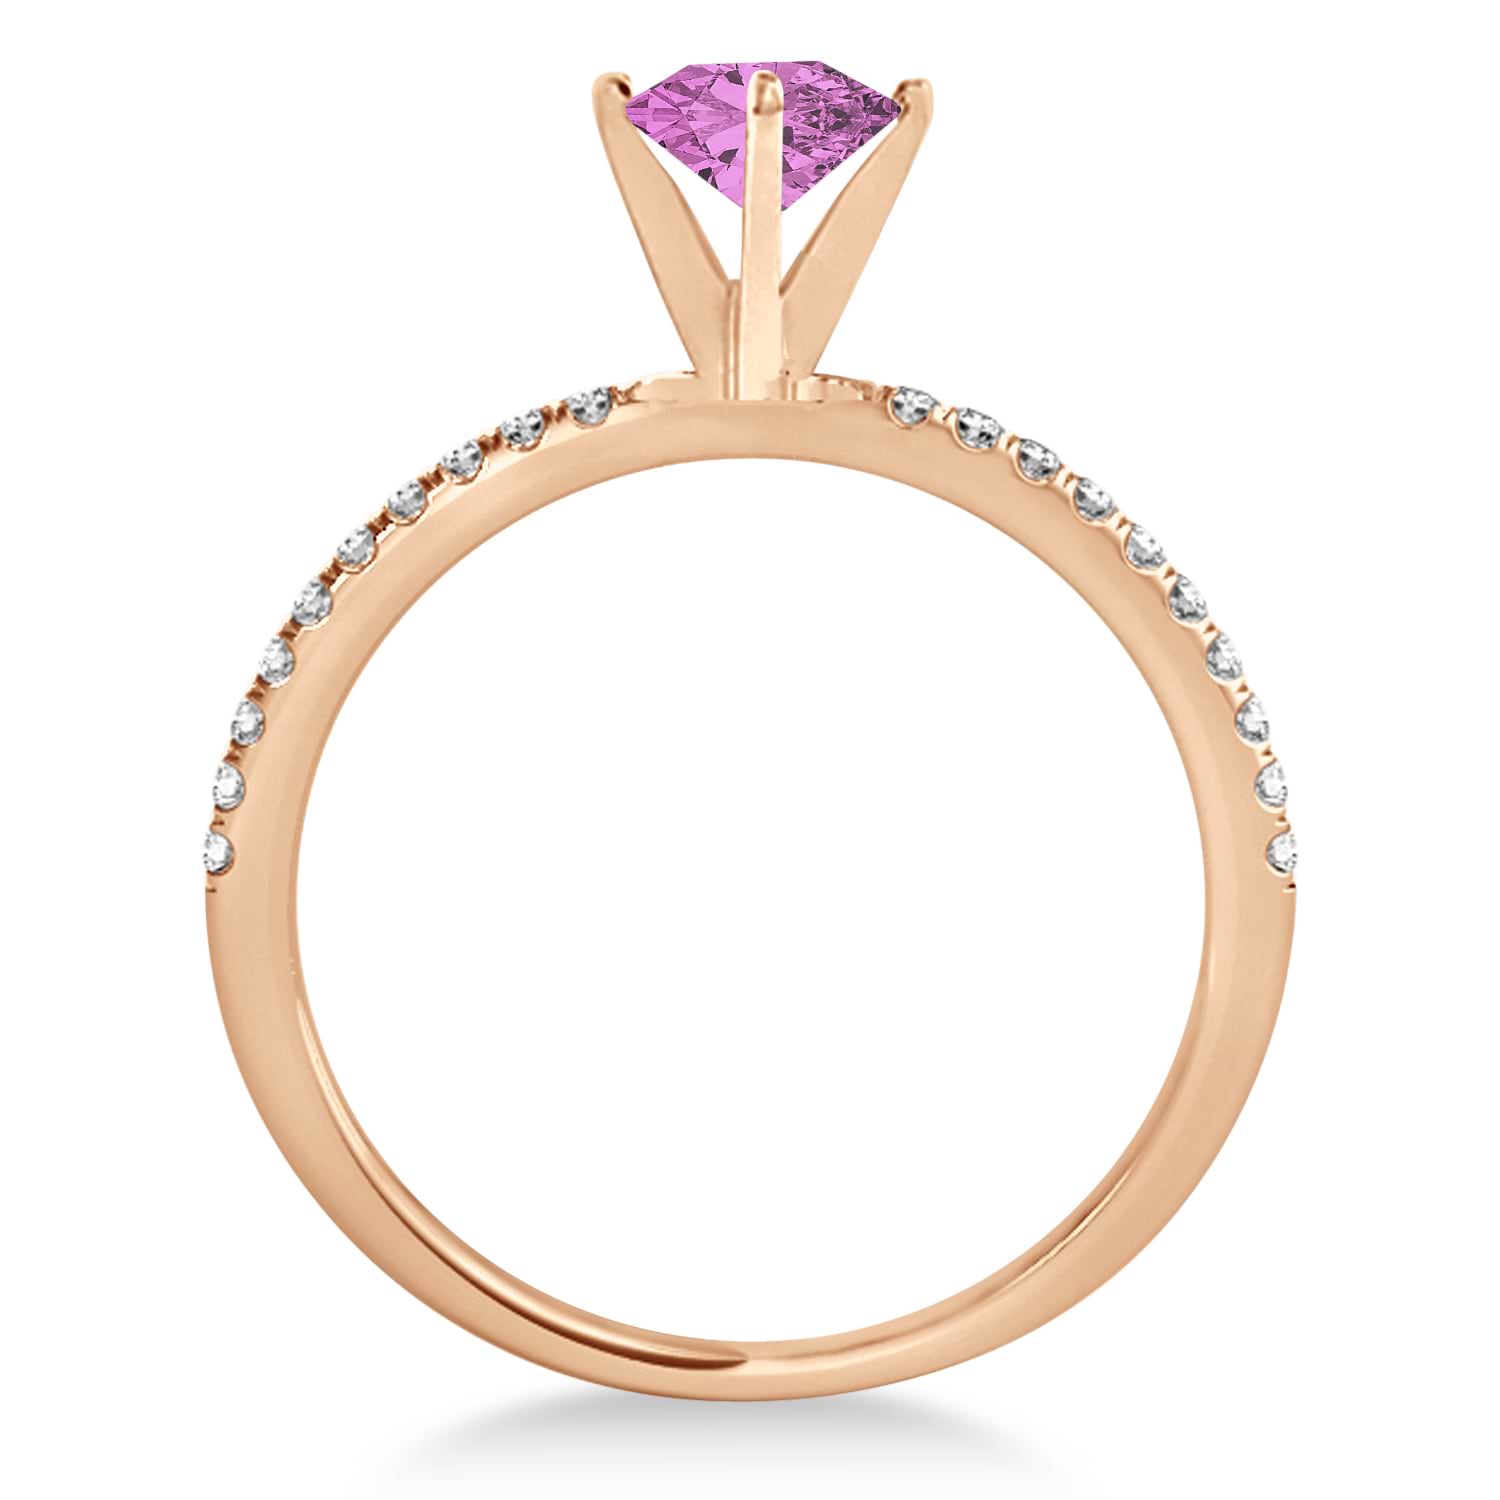 Pink Sapphire & Diamond Accented Oval Shape Engagement Ring 18k Rose Gold (3.00ct)